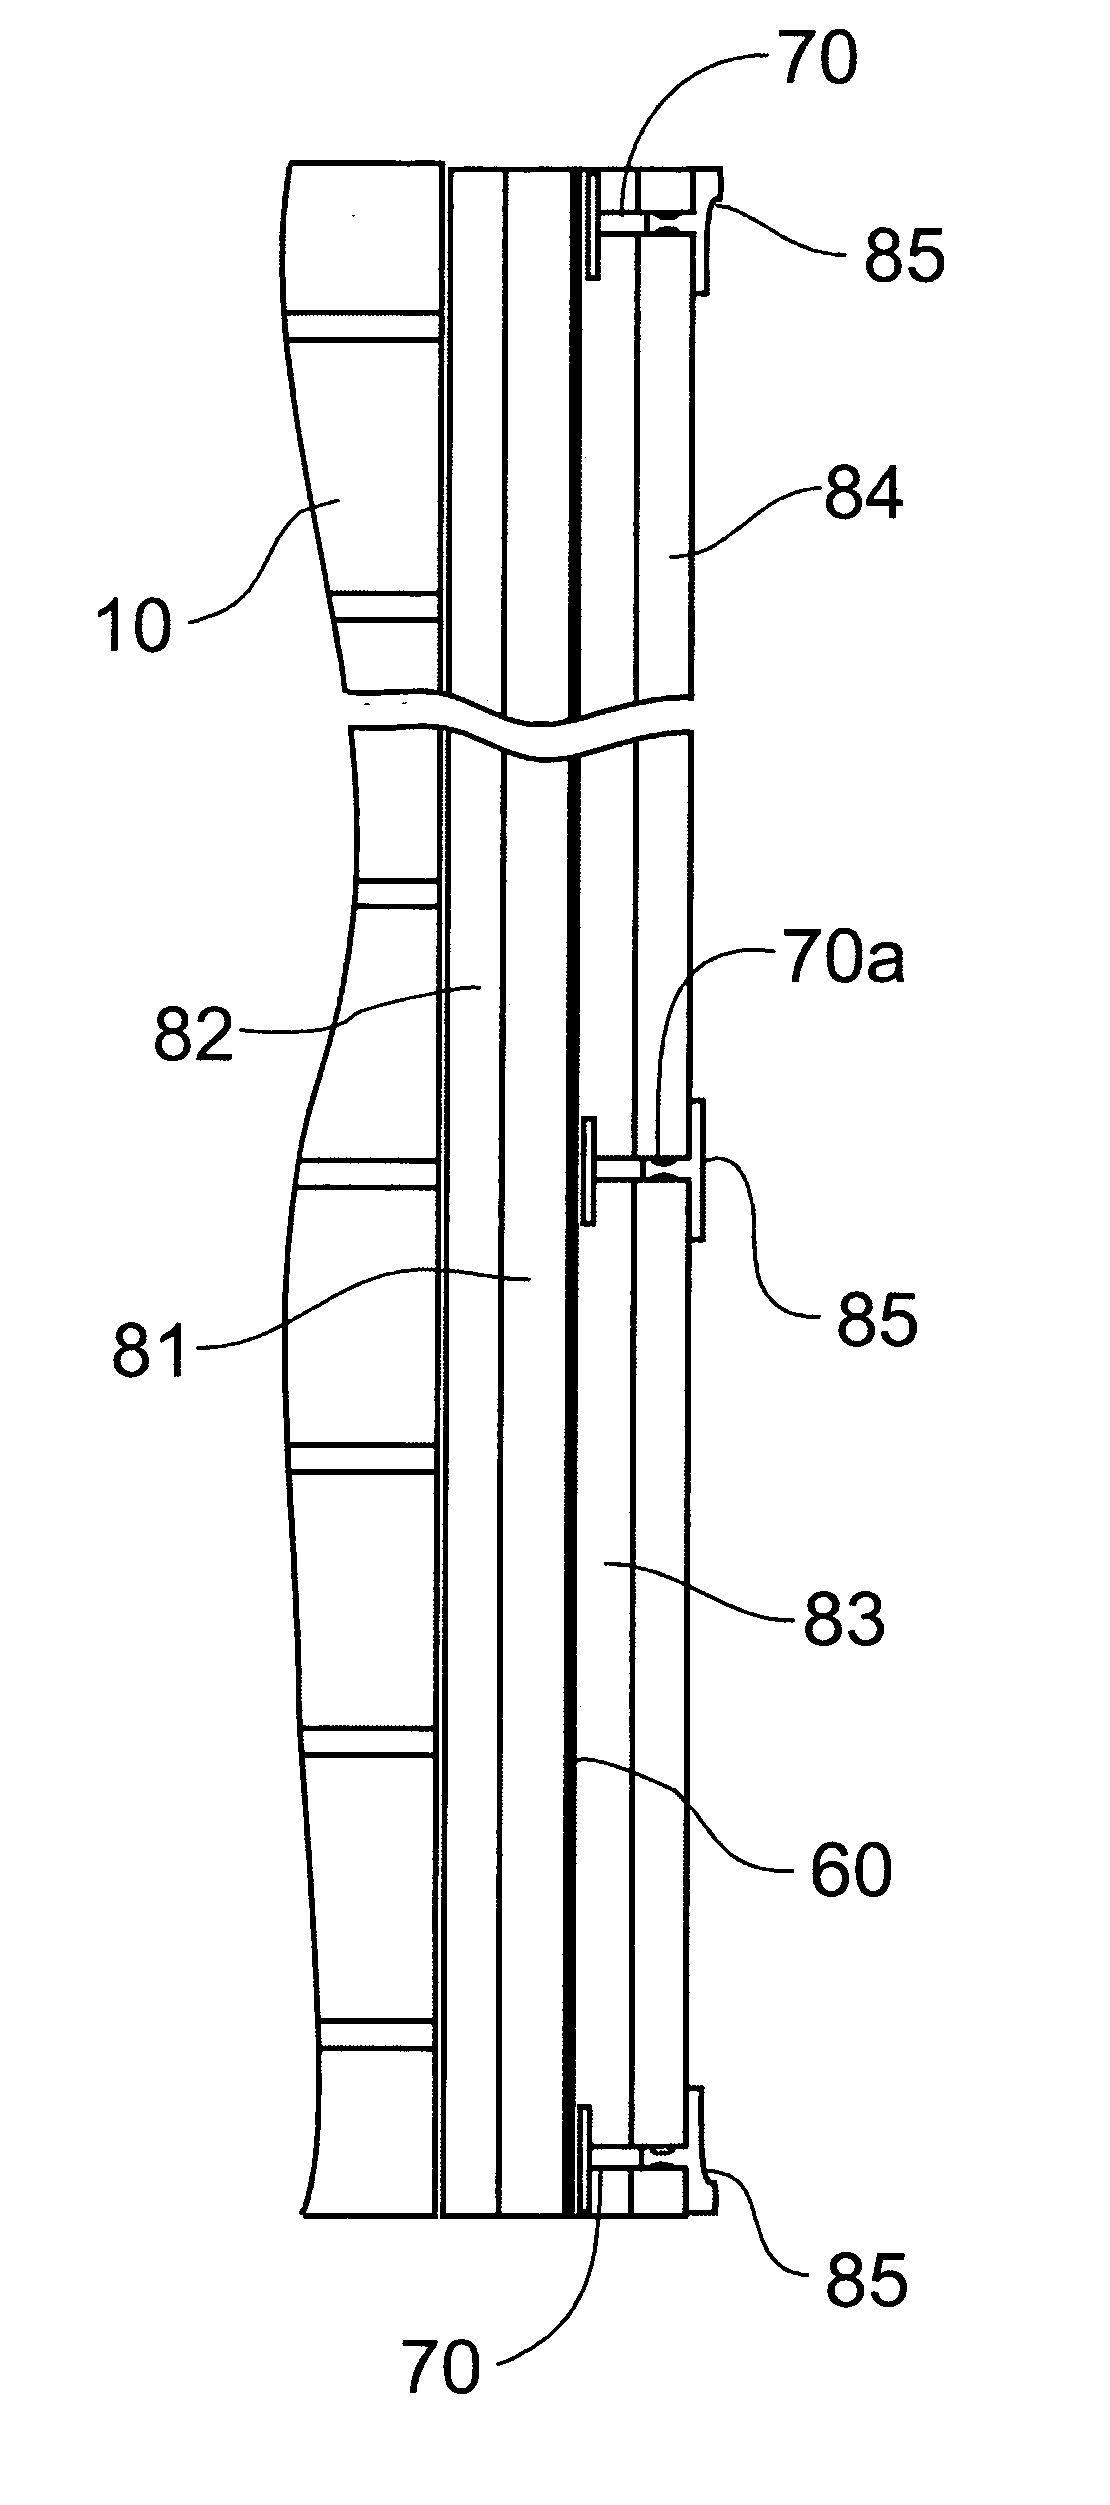 Insulation system with variable position vapor retarder